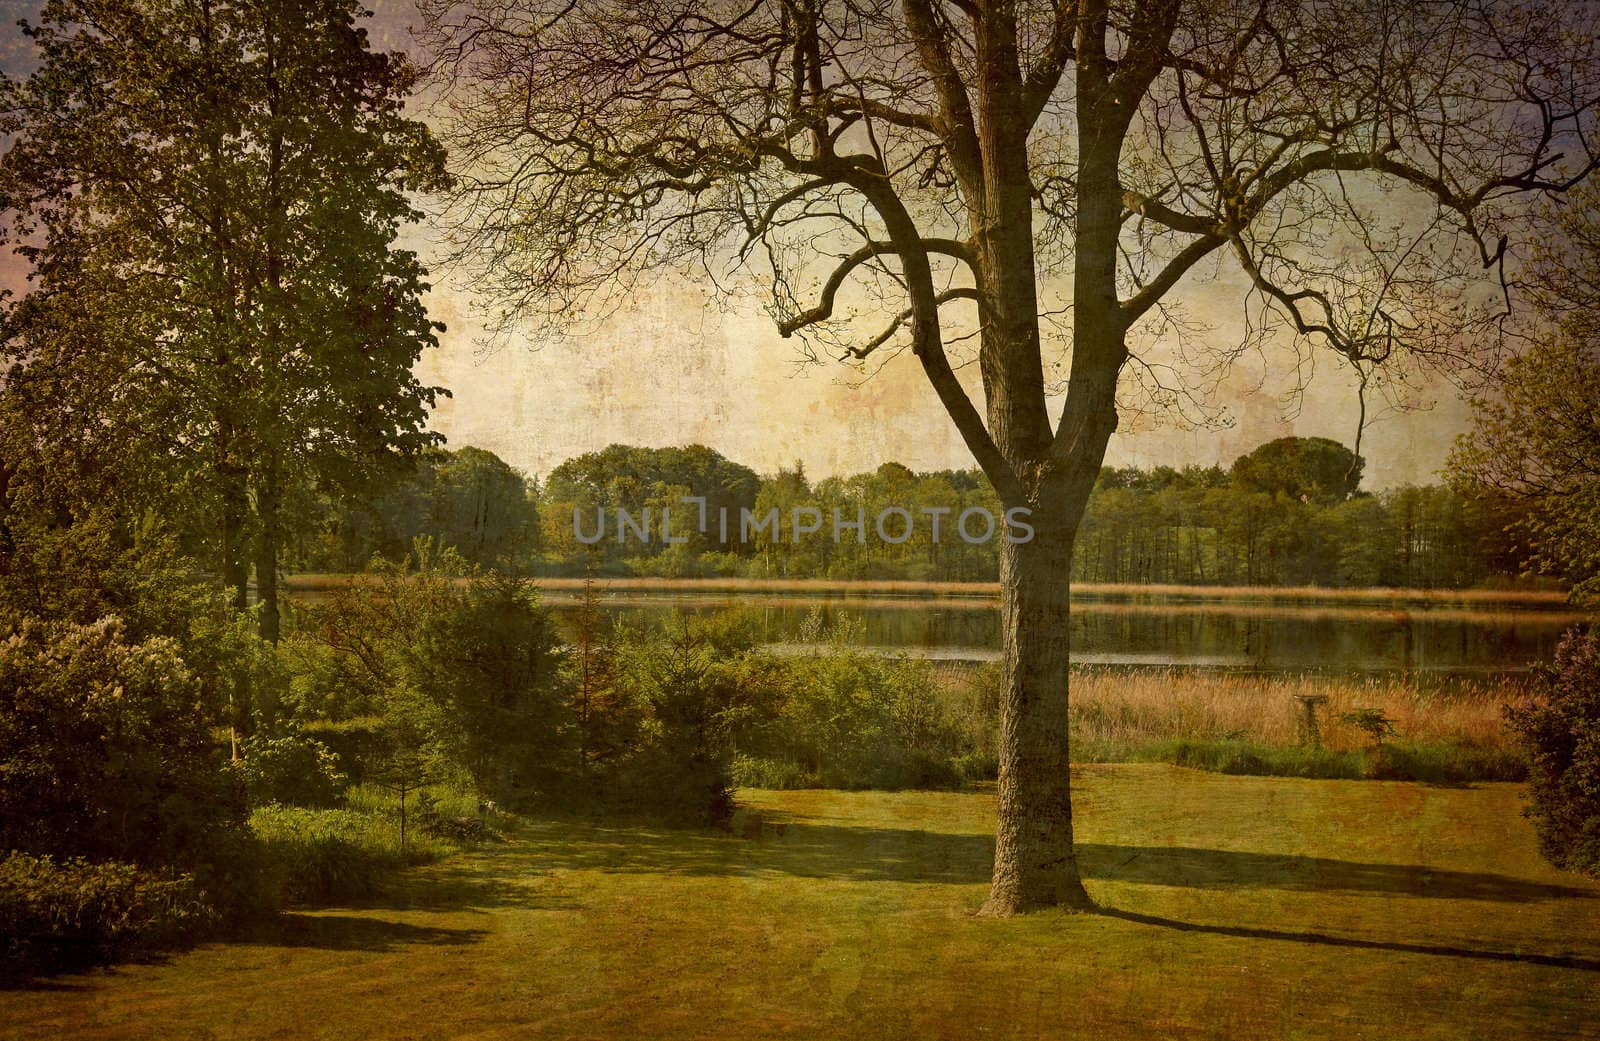 Artistic work of my own in retro style - Postcard from Denmark. - Morning scenic by the lake.